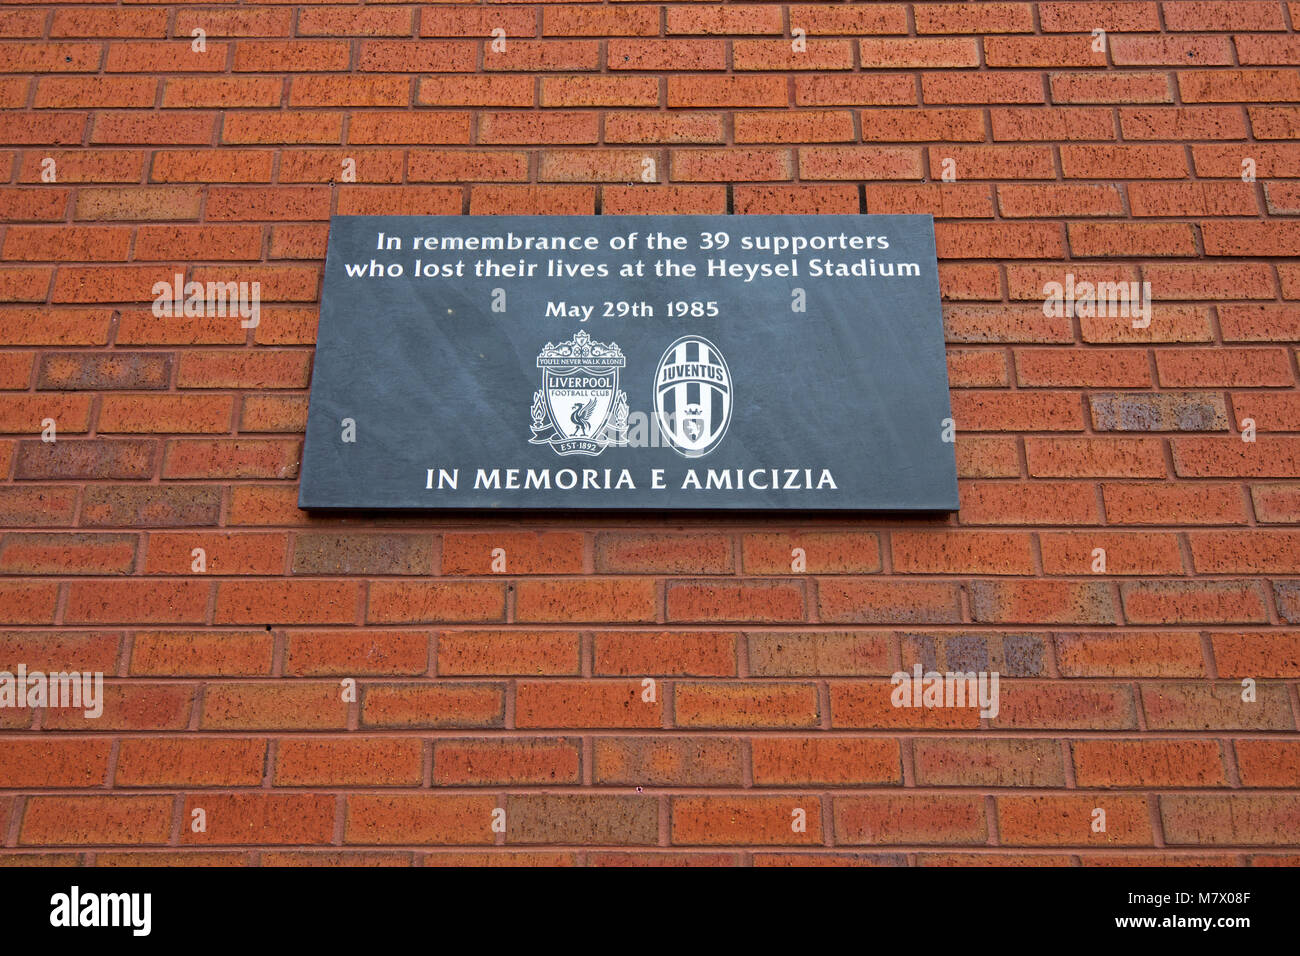 Plaque at Liverpool Football Club in memory of the 39 people who lost their lives in the Heysel Stadium disaster in 1985. Stock Photo